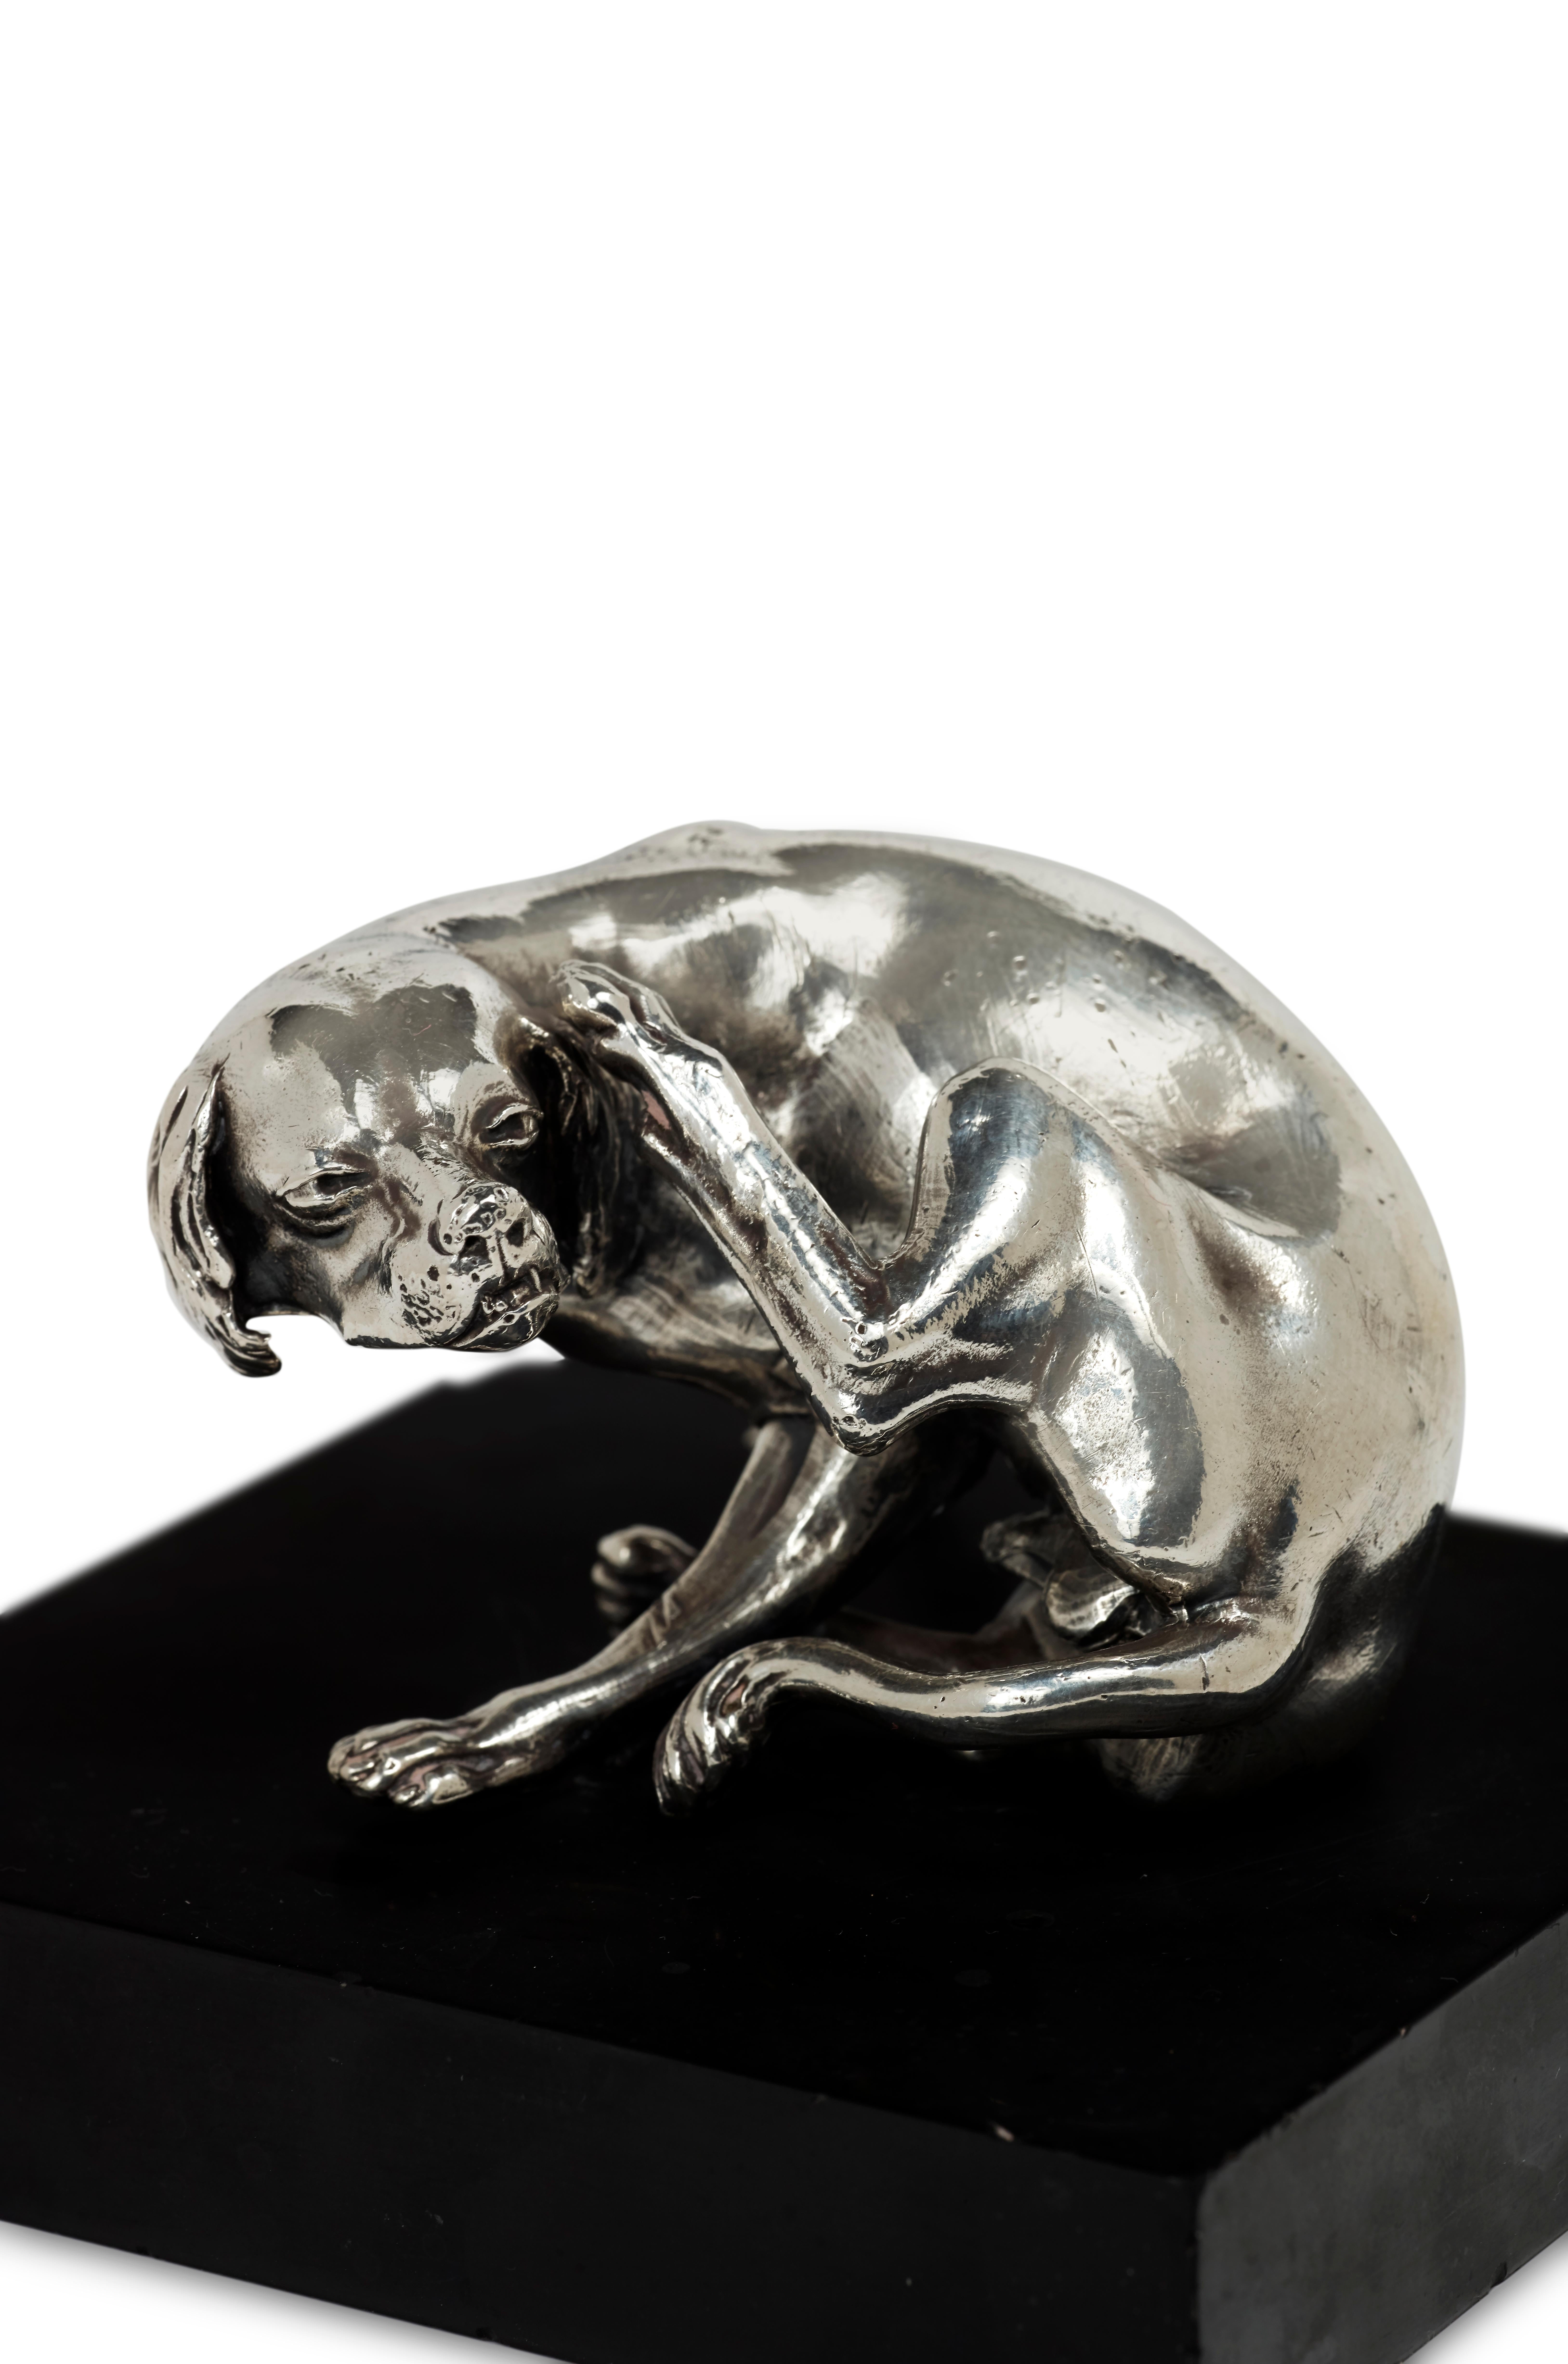 This amusing naturalistic sculpture in silver-plated pewter was probably made in the 17th century by Georg Schweigger. Inspired by a model created by another Nuremberg sculptor, Peter Flötner, it bears witness to the persistence during the baroque